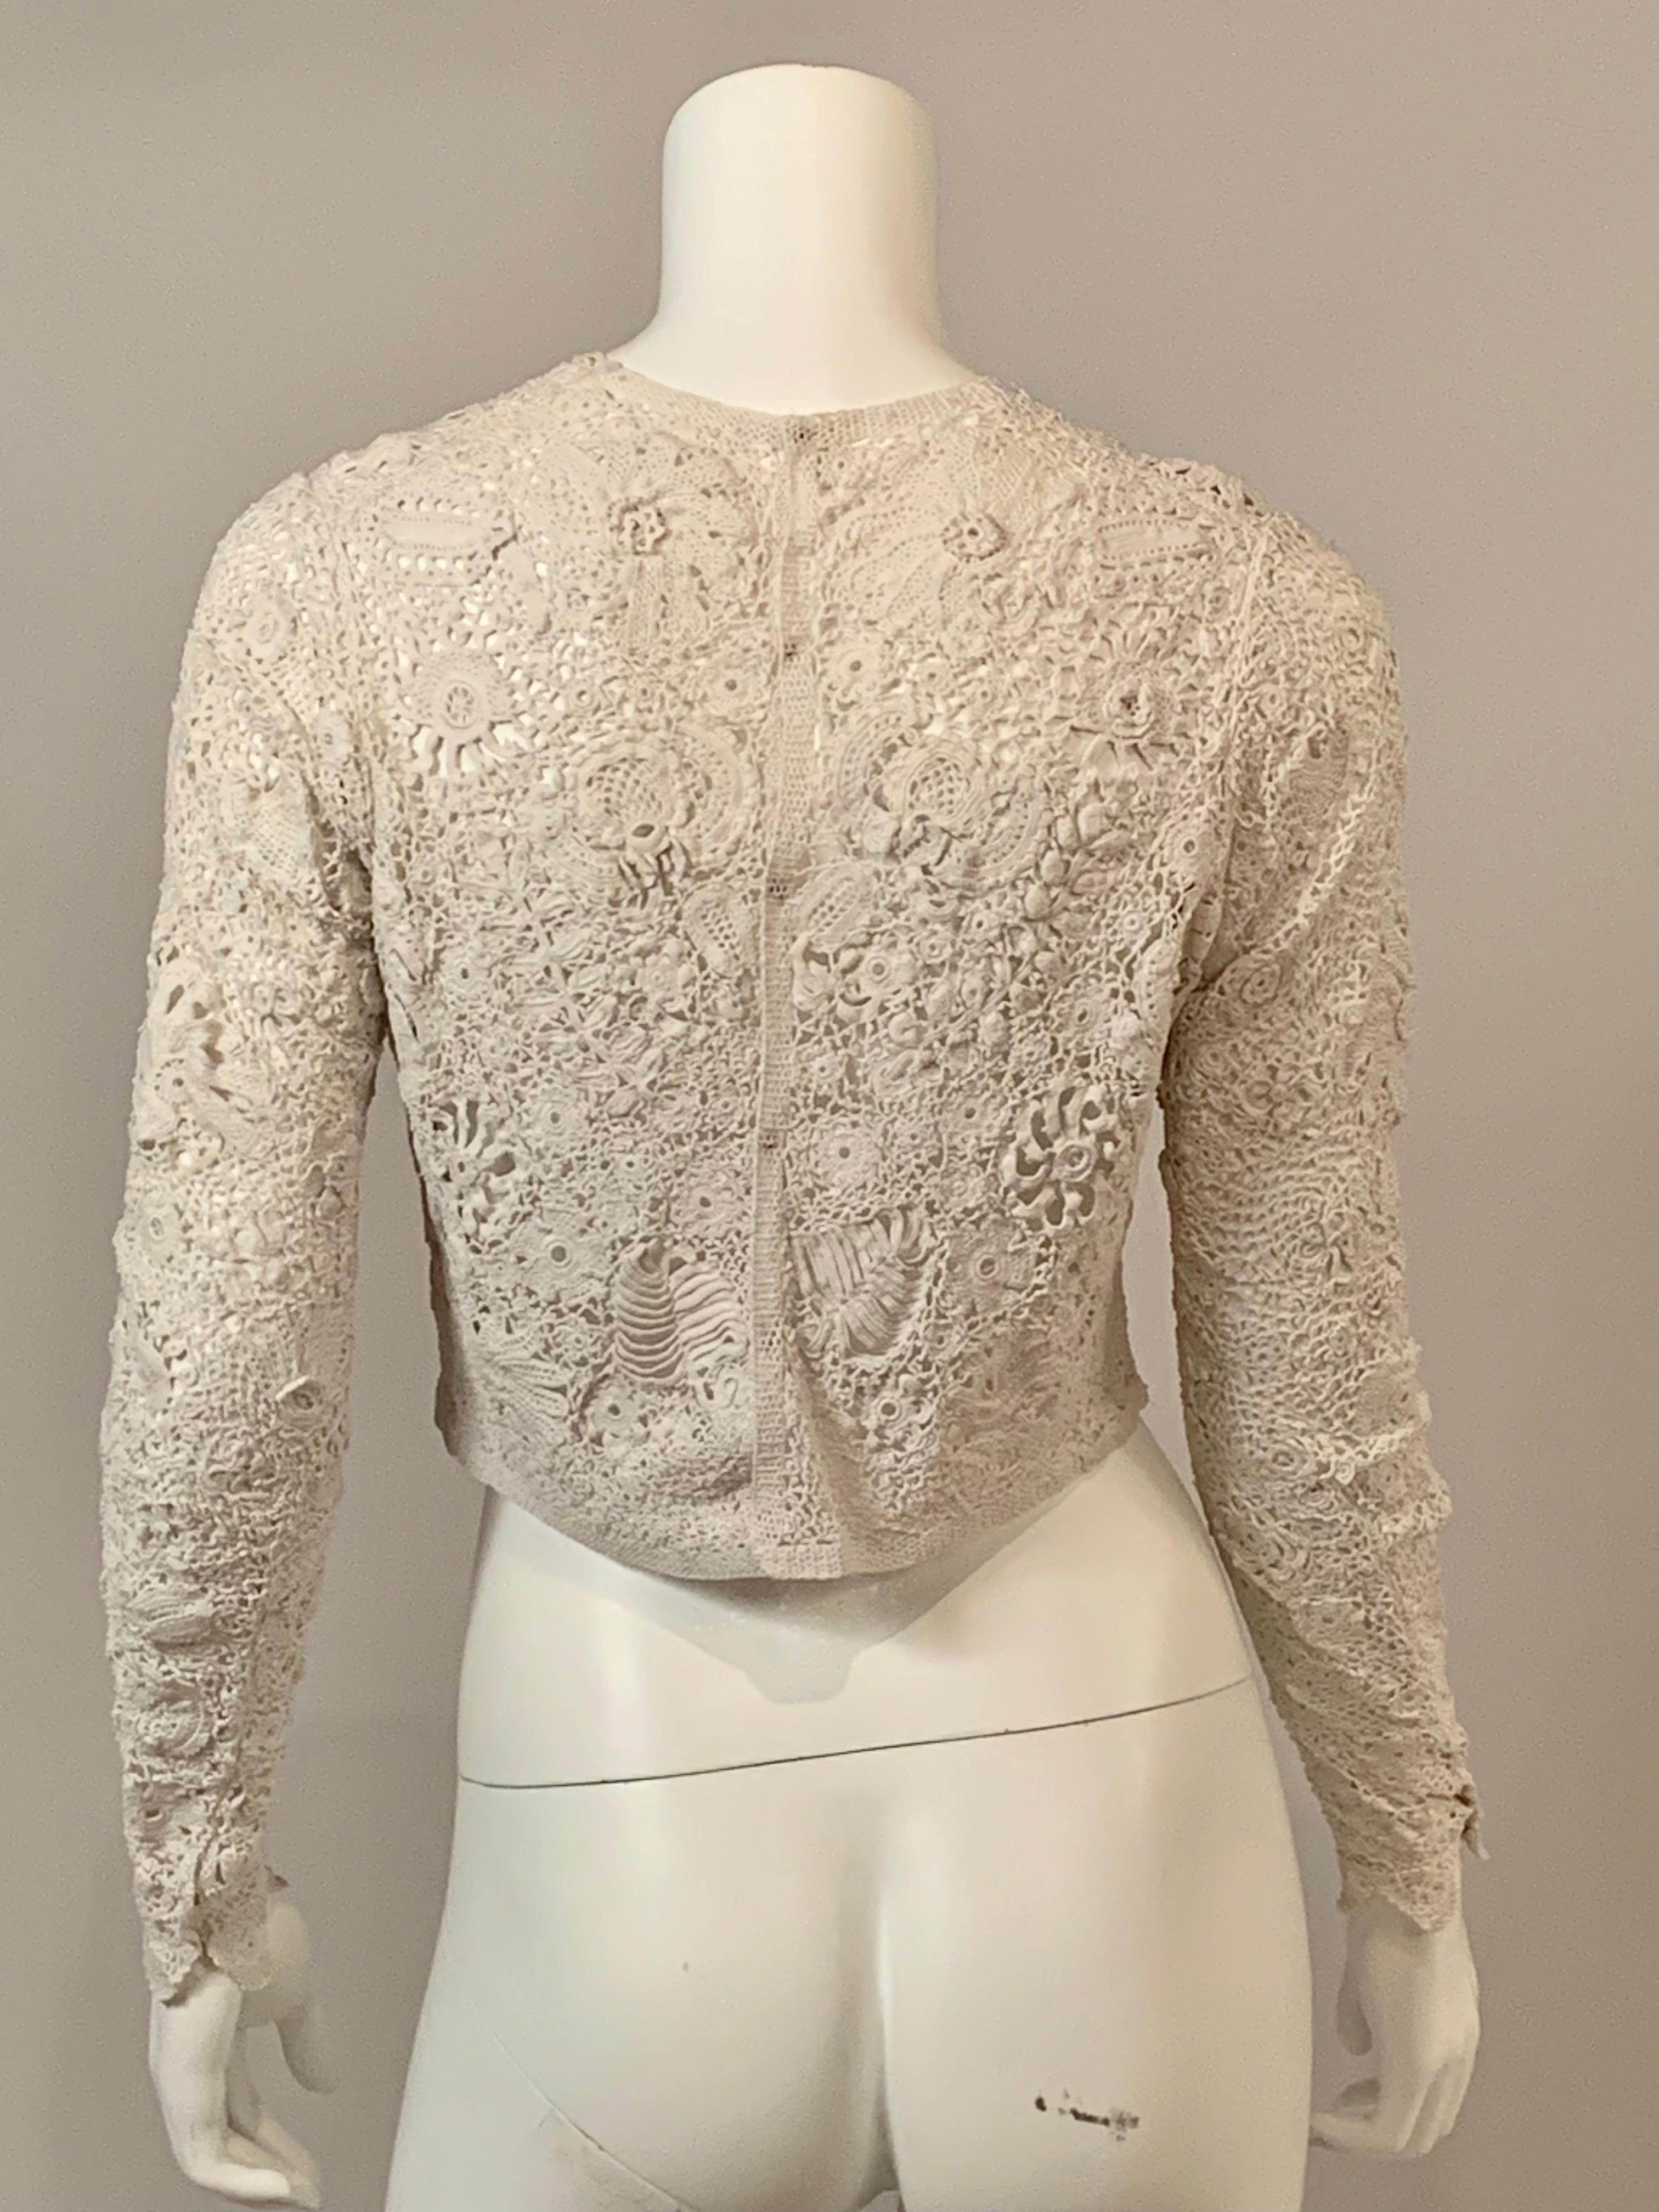 Antique Hand Crocheted Irish Lace Blouse with Flowers and Shamrocks 9